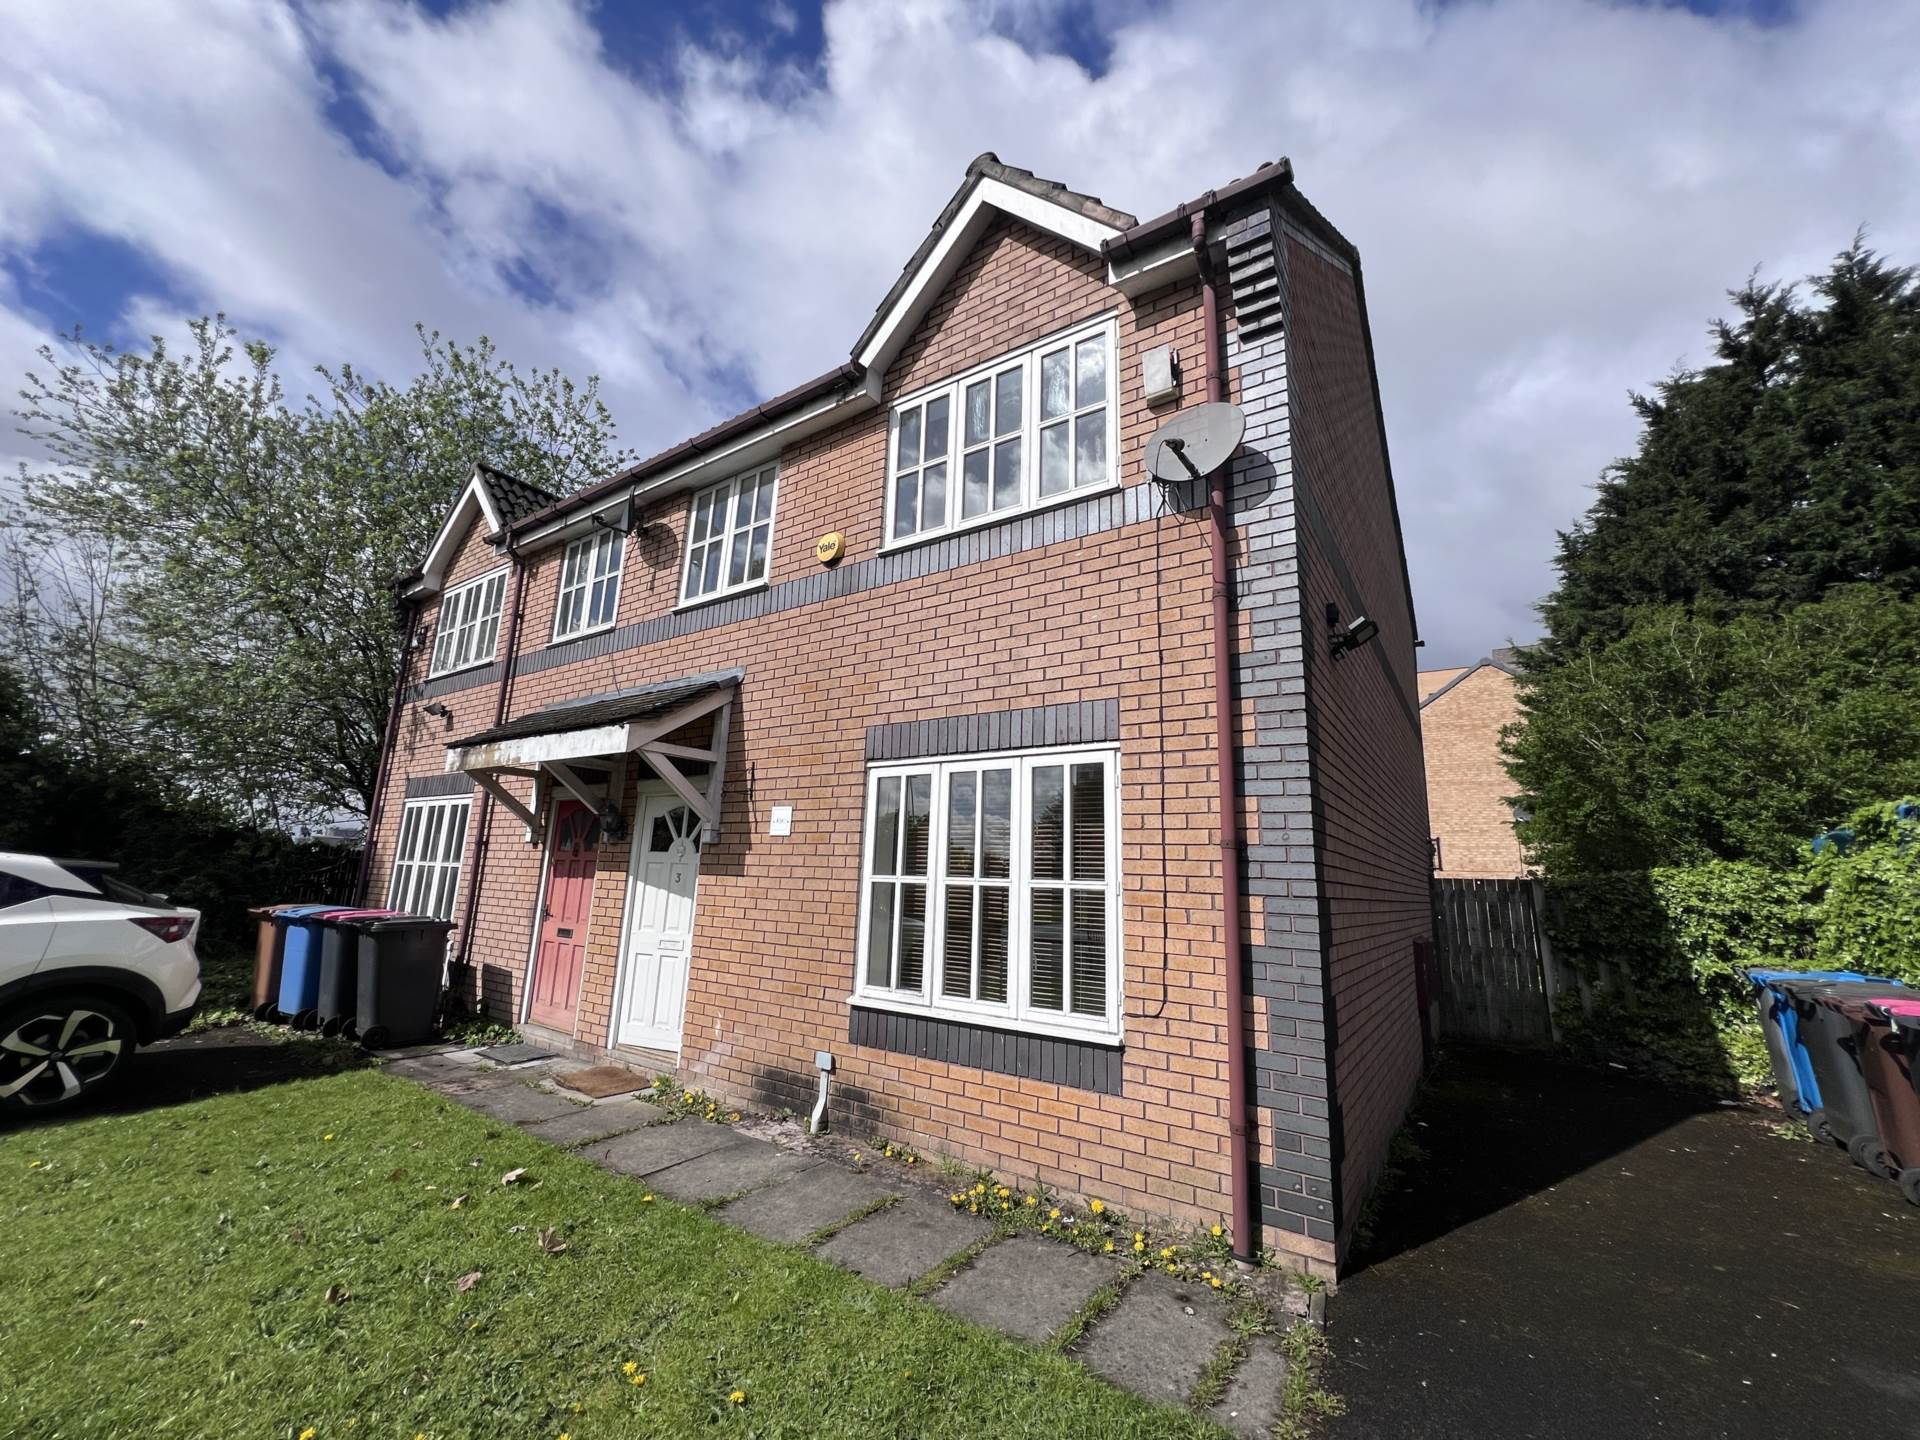 3 bed Semi-Detached House for rent in Salford. From Sun Bright Property Ltd